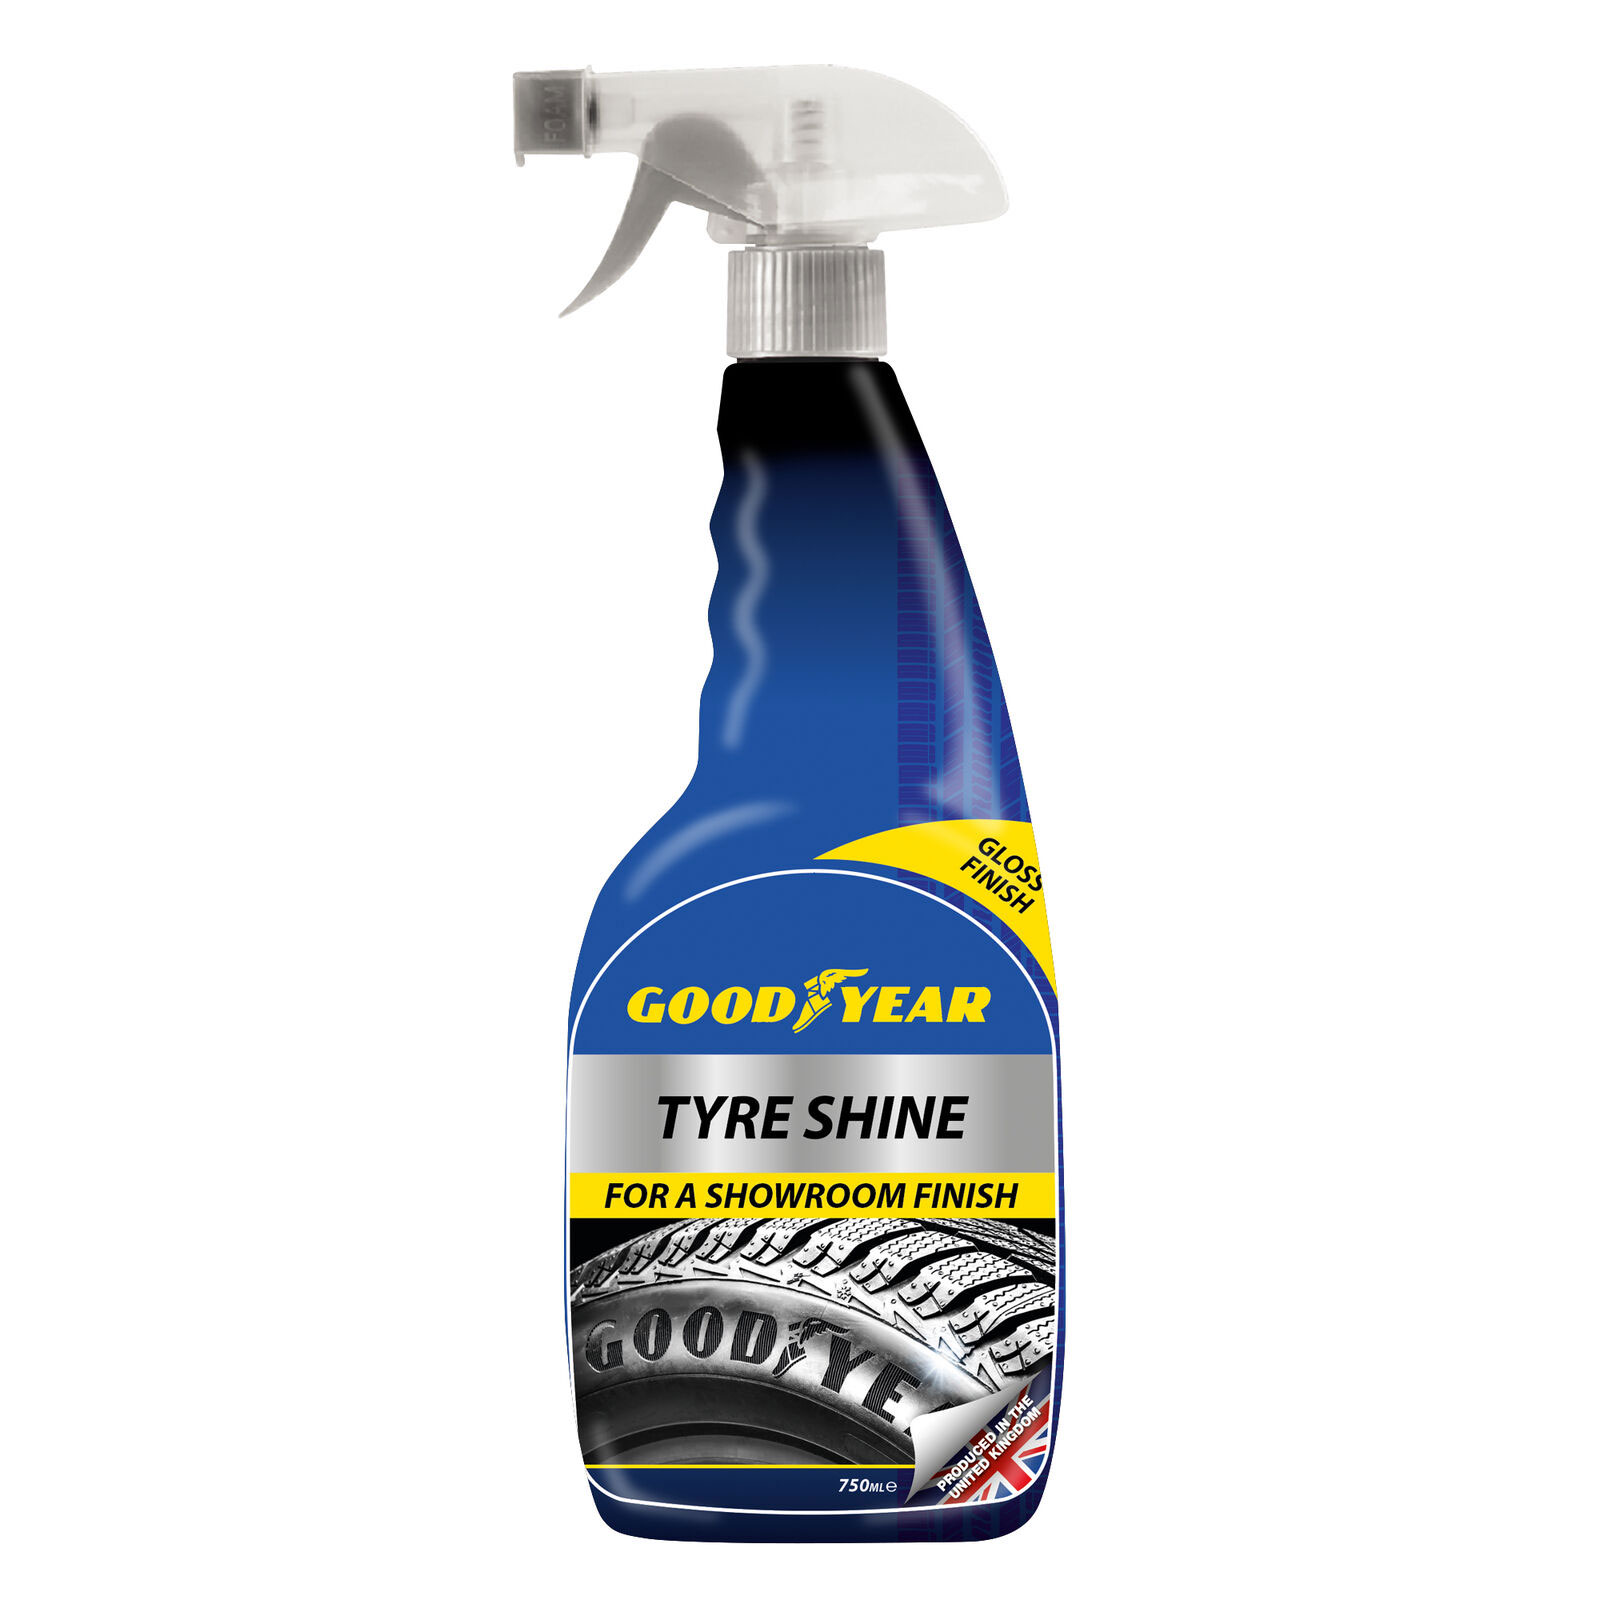 GOODYEAR COMPLETE CAR CLEANING KIT 6PCS